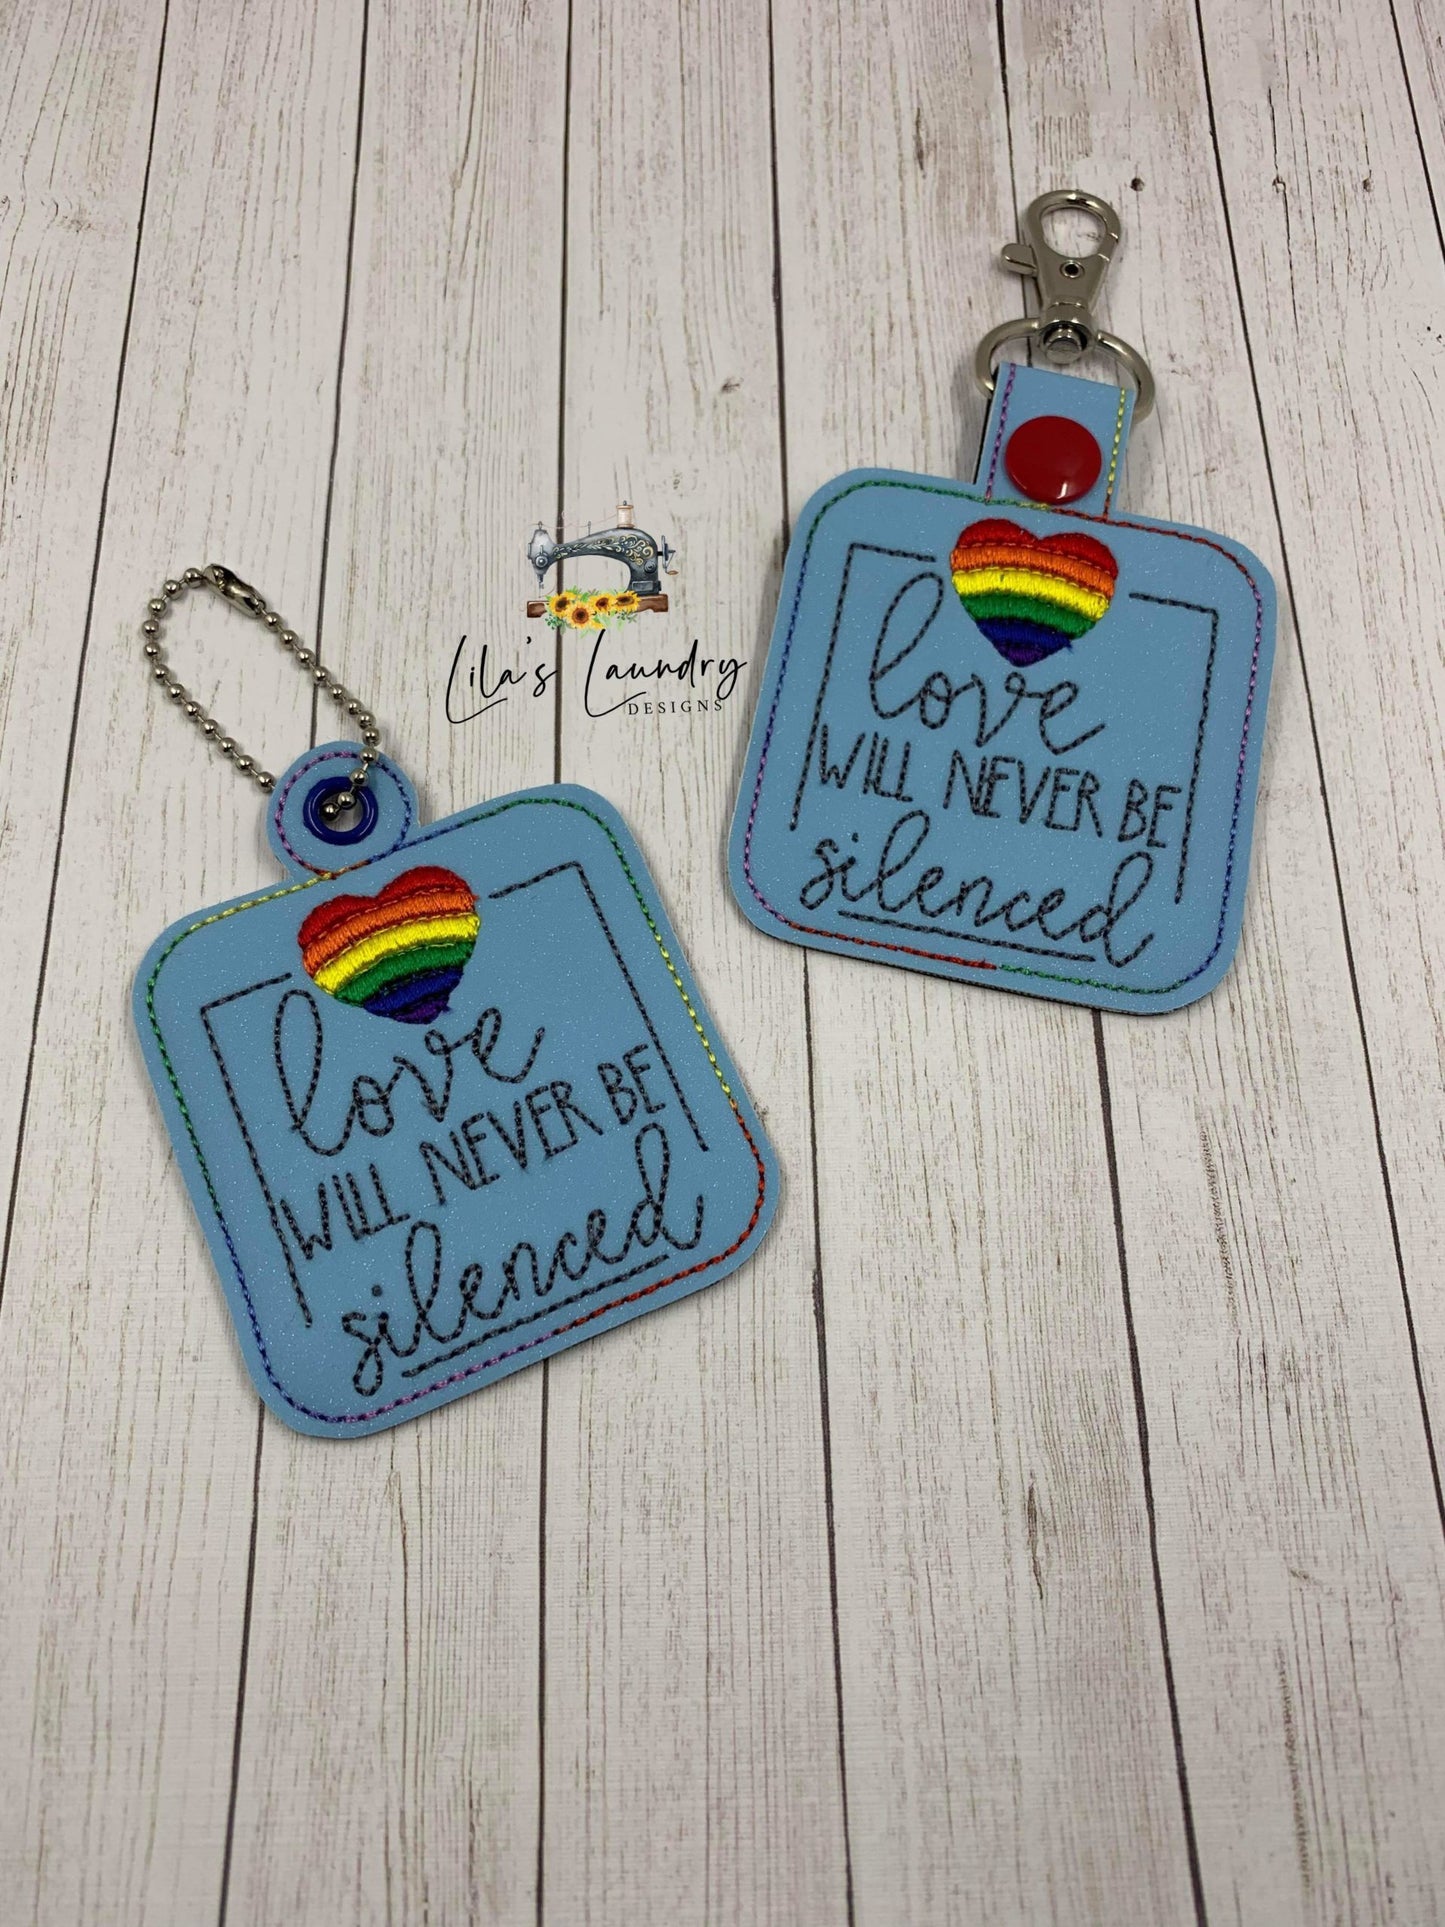 Never Be Silenced Fobs - DIGITAL Embroidery DESIGN